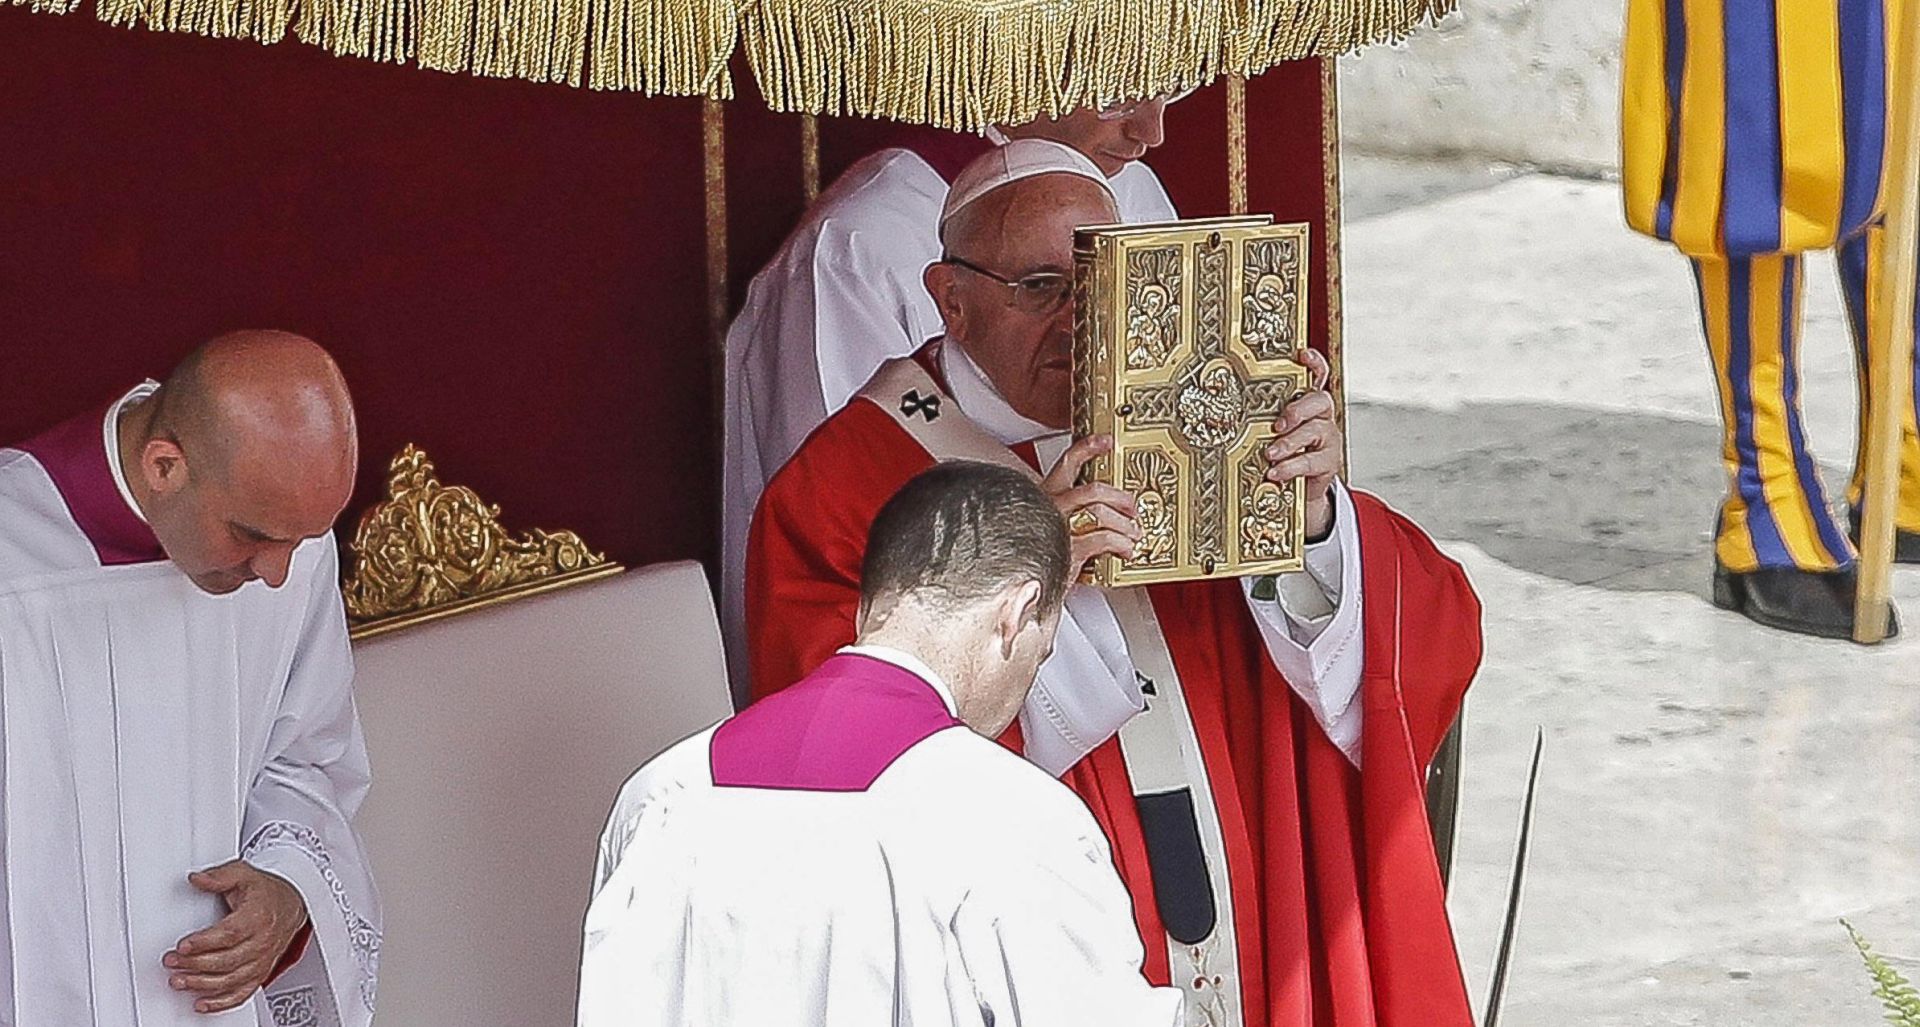 epa06009407 Pope Francis leads a Mass for the Solemnity of Pentecost, in St. Peter's Square at the Vatican, 04 June 2017. Pentecost is celebrated by Christian on the 50th day after Easter, commemorating the descent of the Holy Spirit upon the Apostles.  EPA/GIUSEPPE LAMI